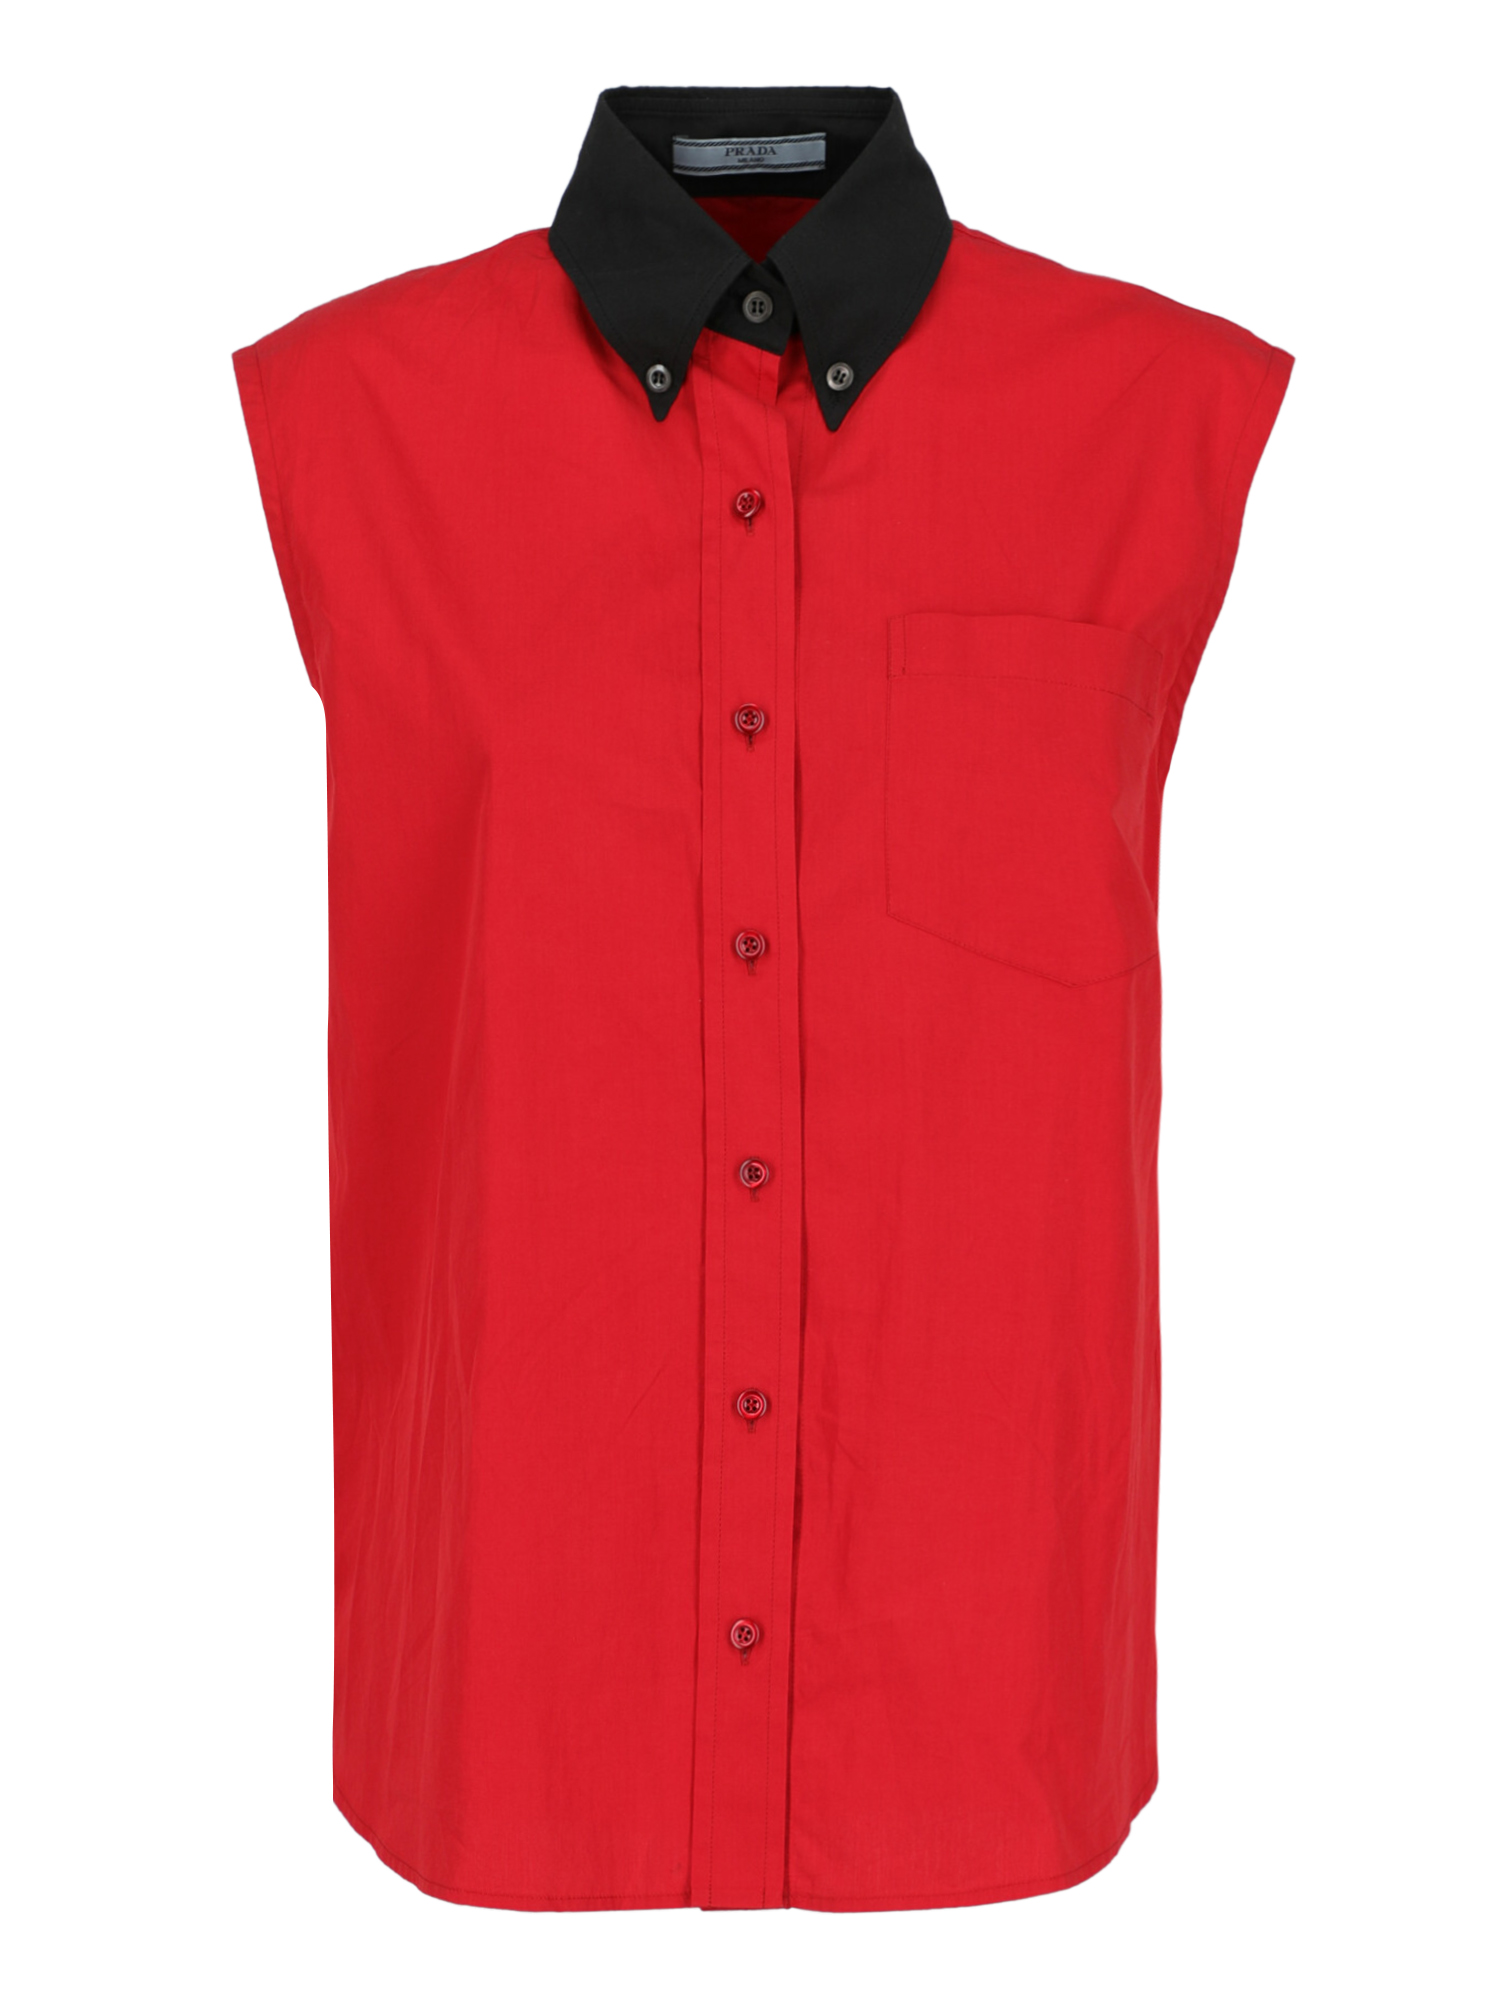 Condition: Good, Solid Color Cotton, Color: Red - S - IT 40 -